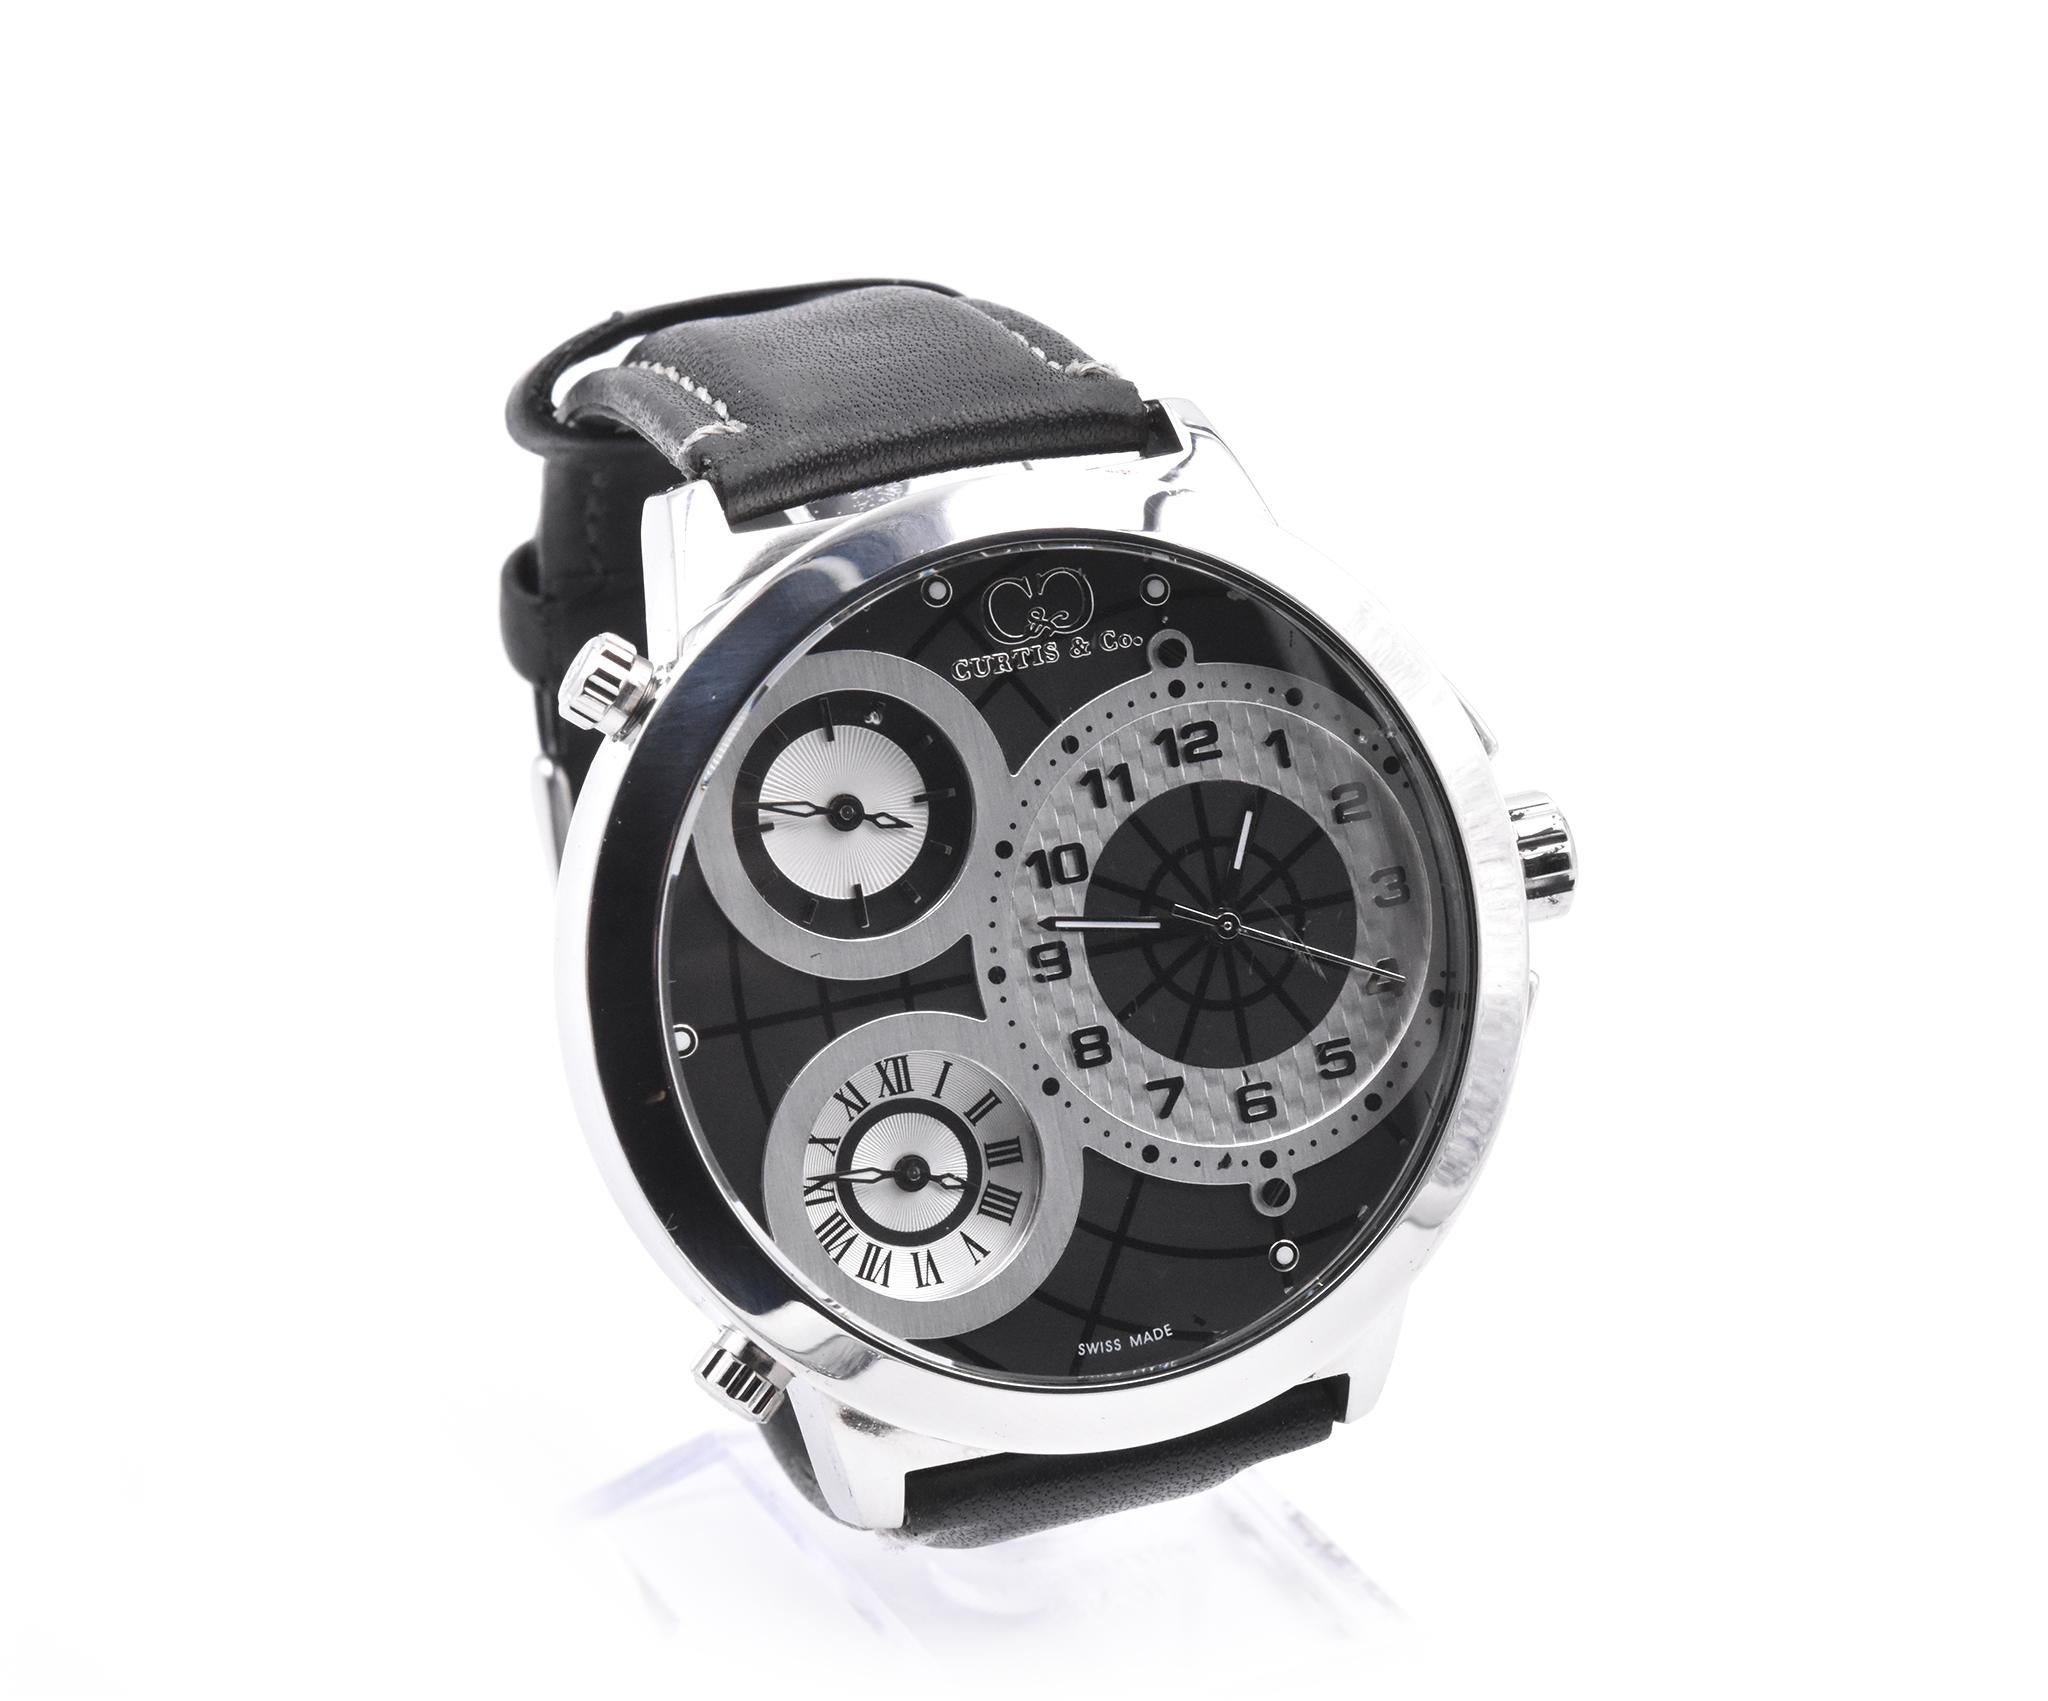 Movement: quartz
Function: hours, minutes, three time zones
Case: 50mm round stainless steel
Dial: black with three sub dials are at 11 and 7 o'clock for the additional time zones
Reference: Big World Three Time Zone
Case #: 008
Does not come with